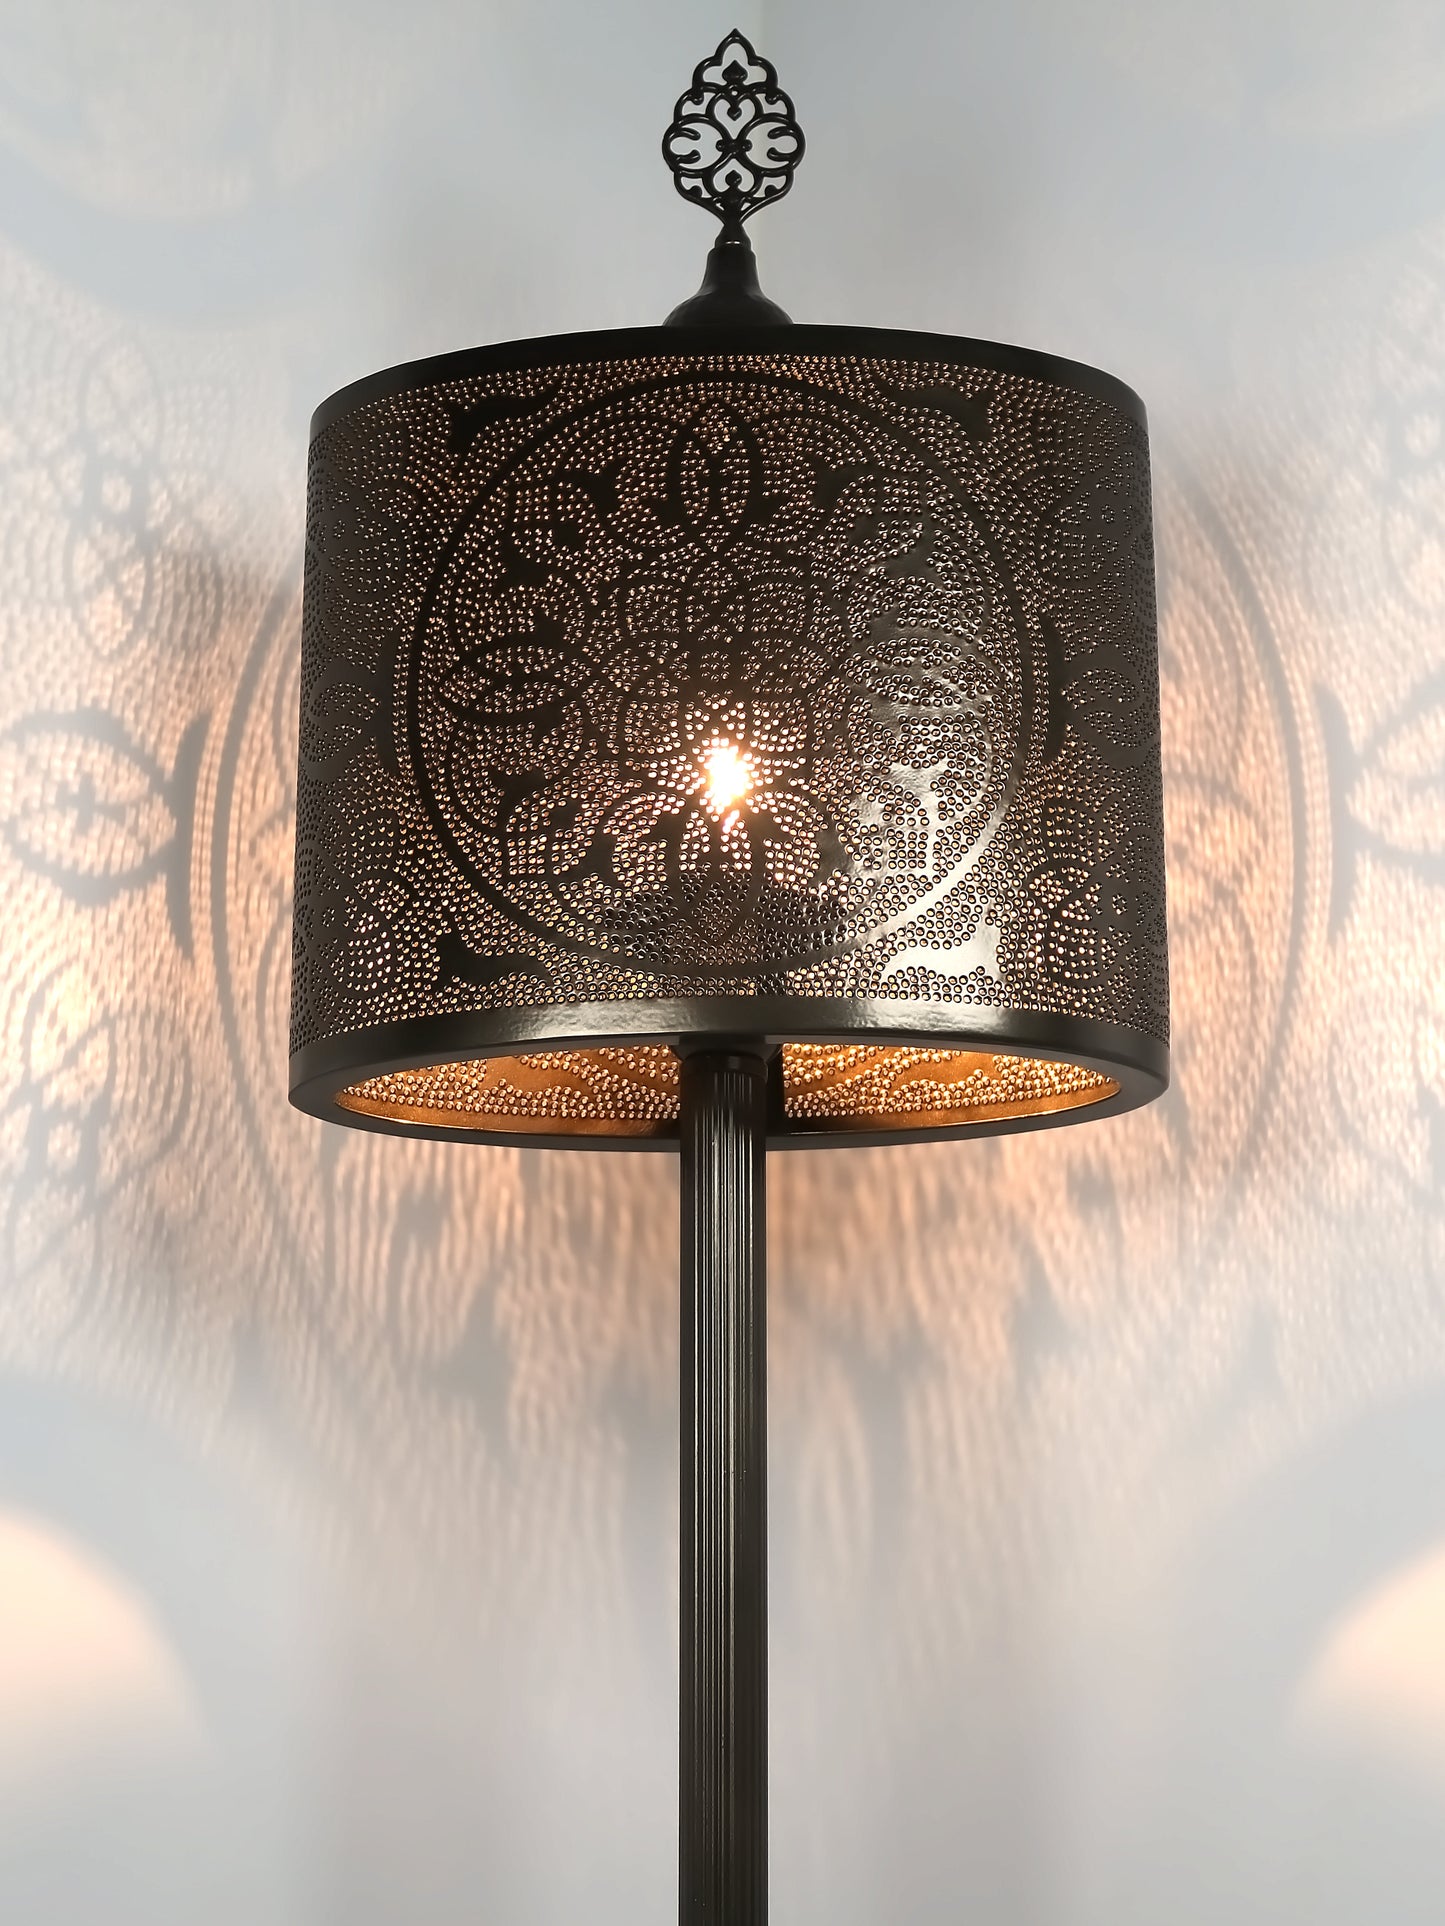 Moroccan Table Lamp Shade Turkish Effect Pattern